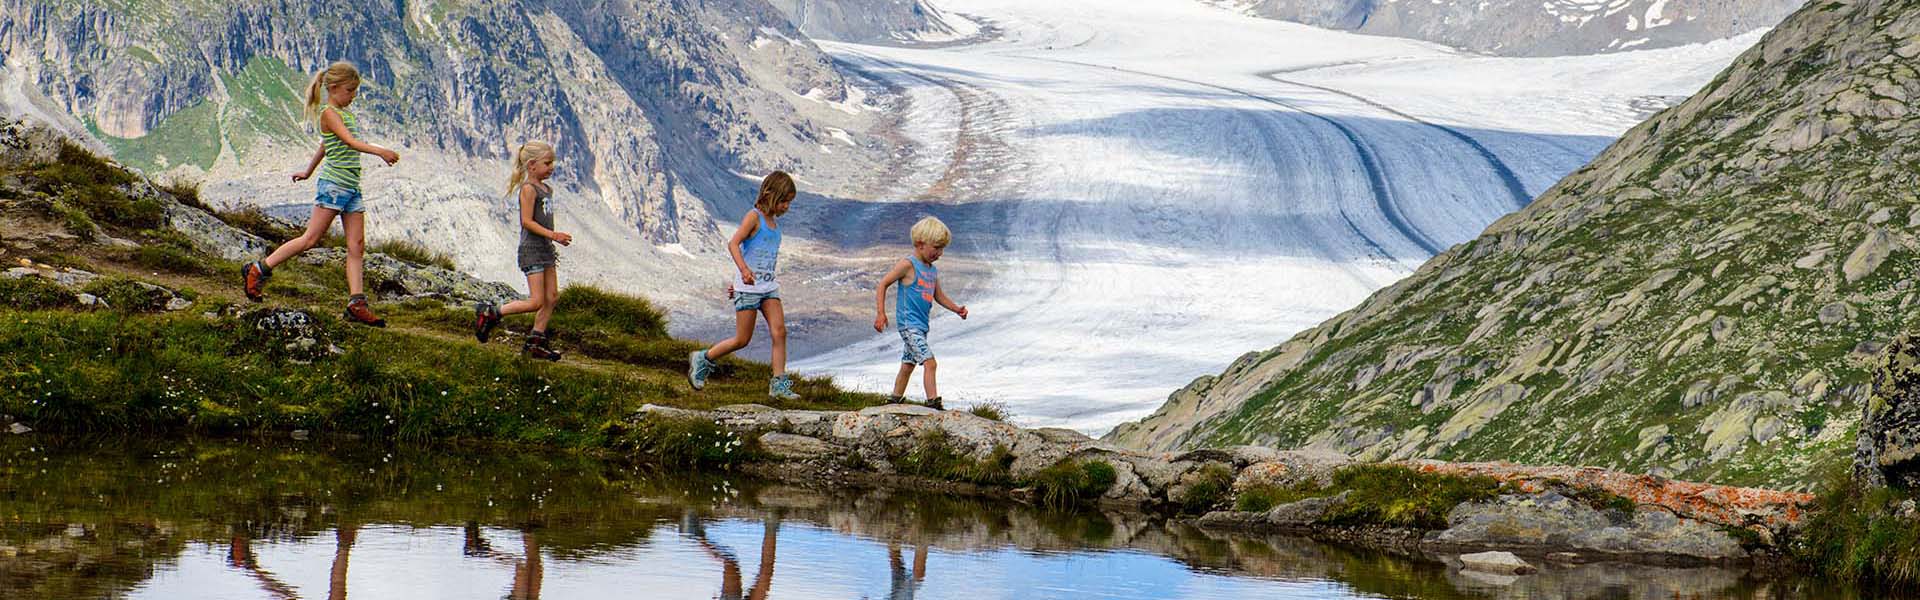 Kids and in the background the Aletsch Glacier